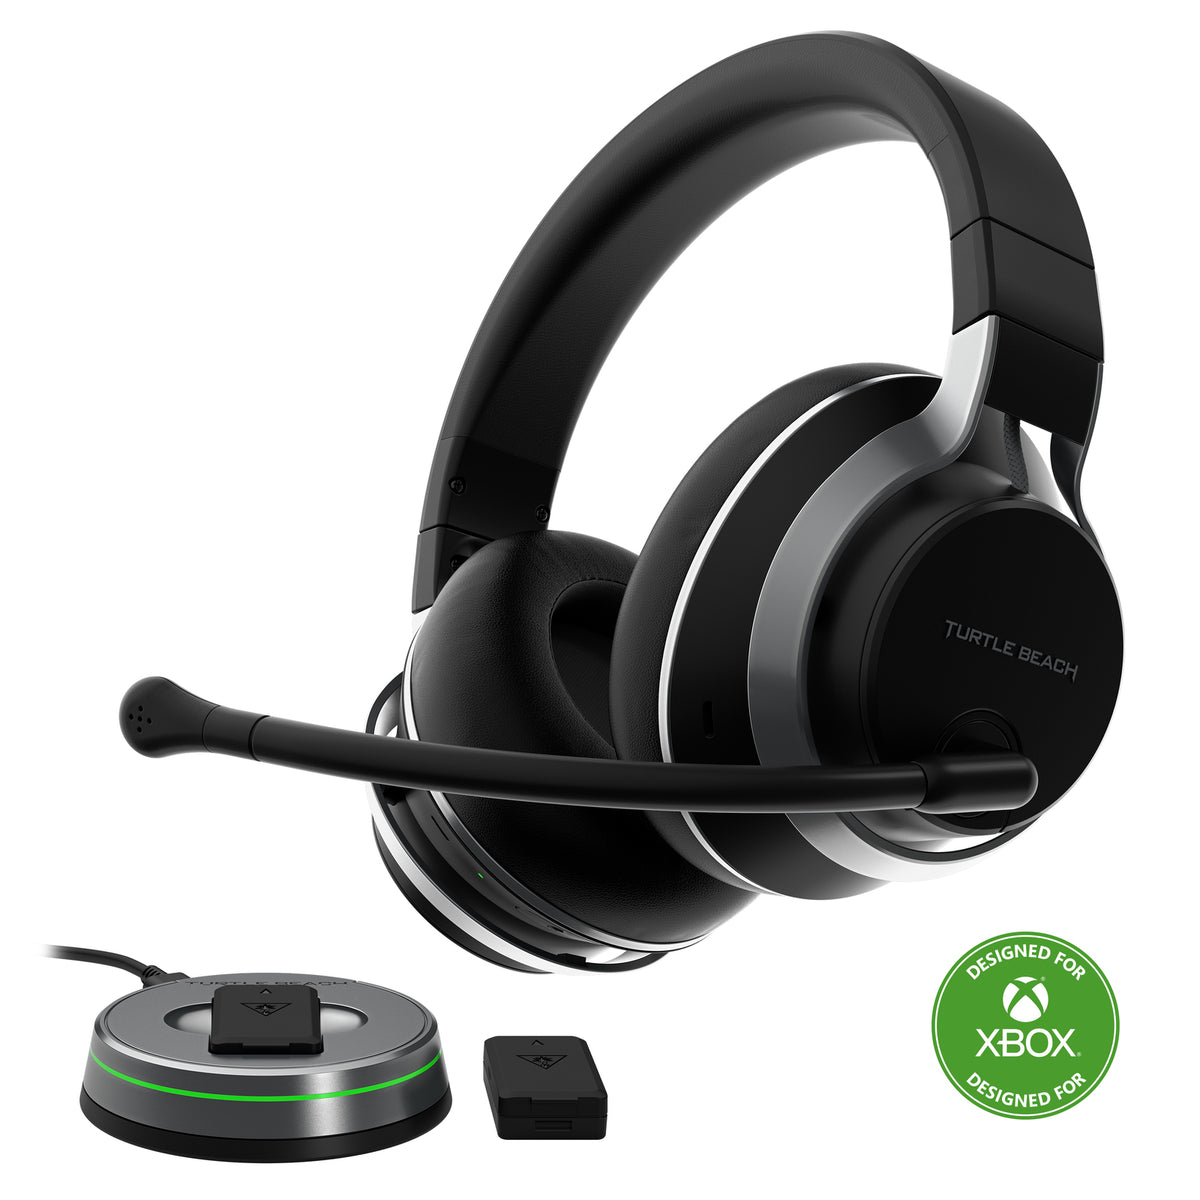 Turtle Beach Stealth Pro Wireless Gaming Headset for Xbox (Black) Xb